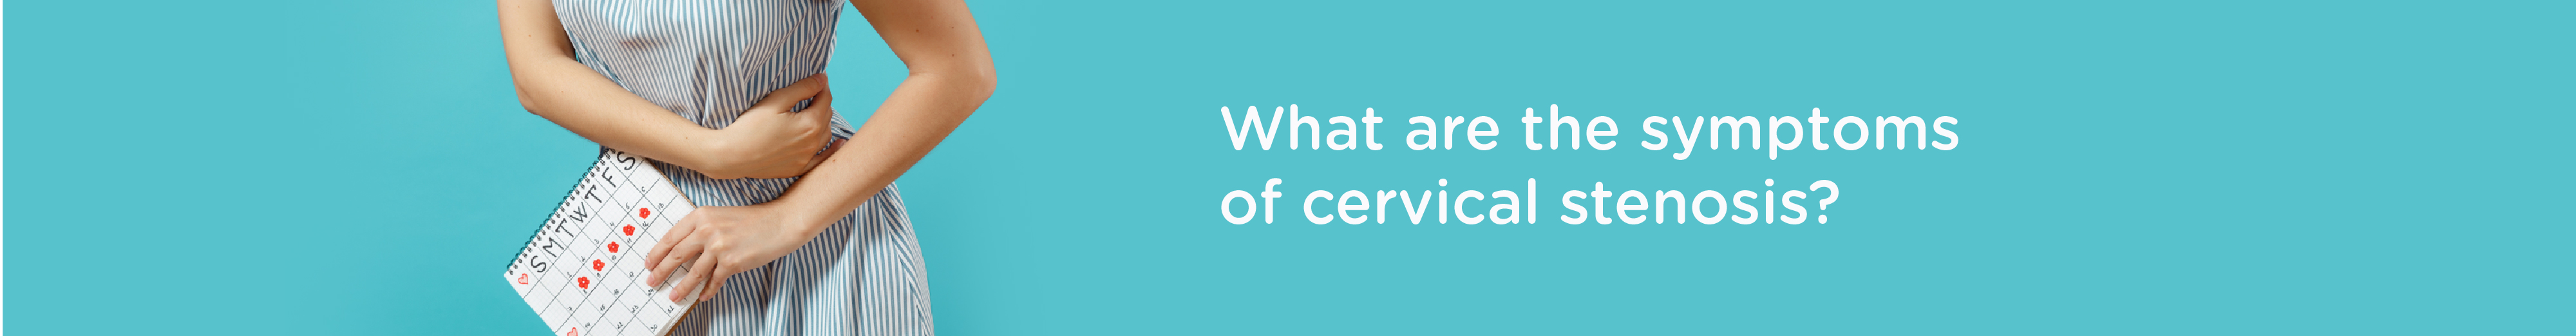 What Are the Symptoms of Cervical Stenosis?